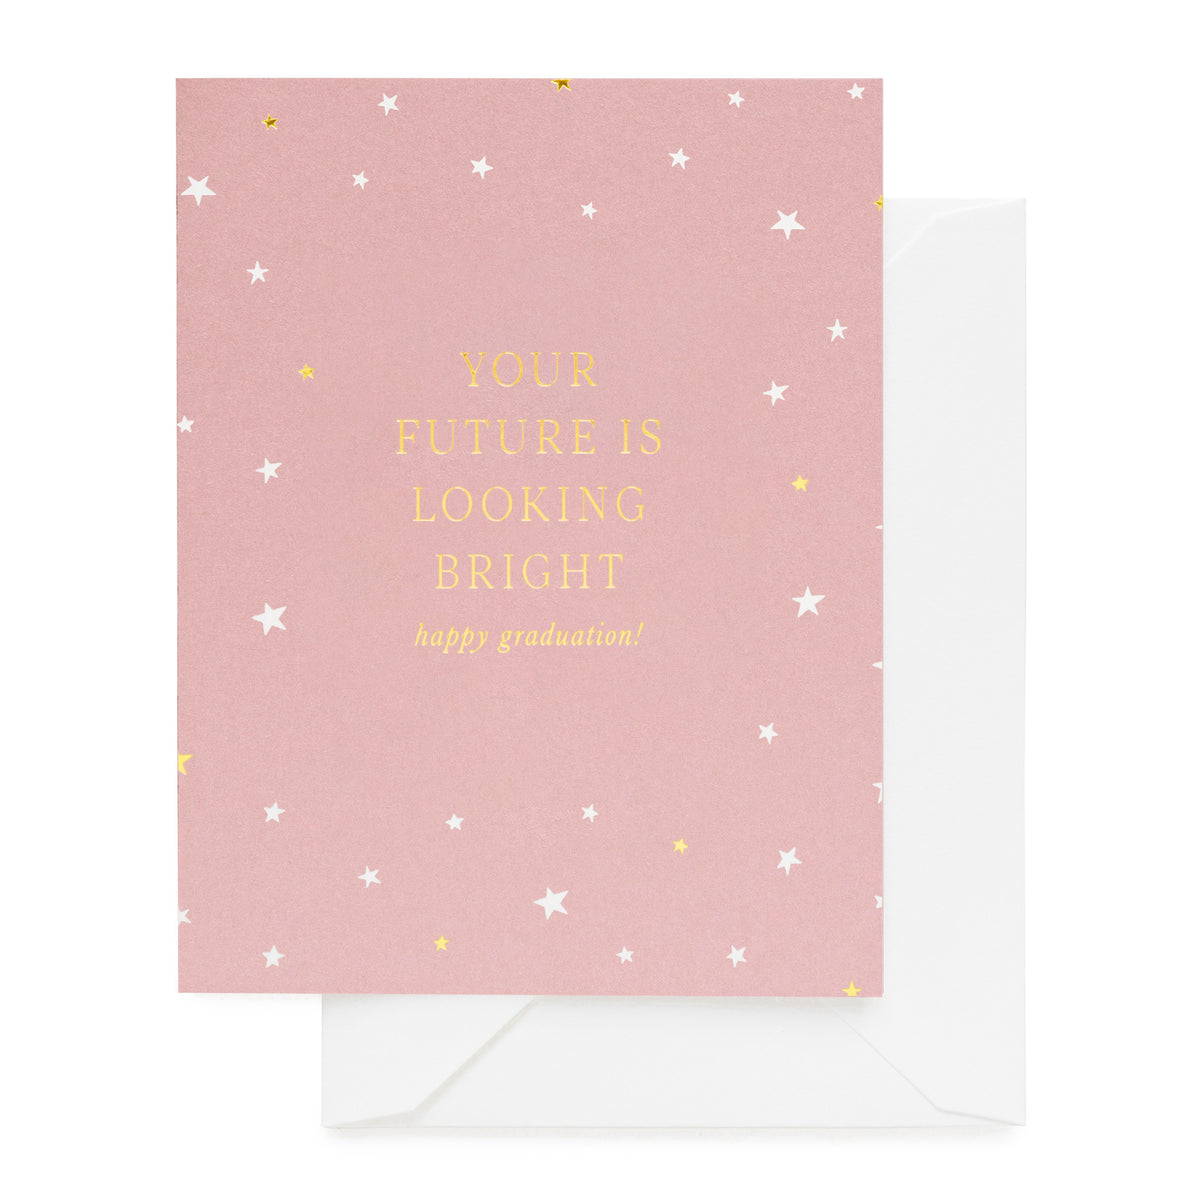 rose card with "your future is looking bright happy graduation!" in gold foil with scattered white and gold stars, white envelope